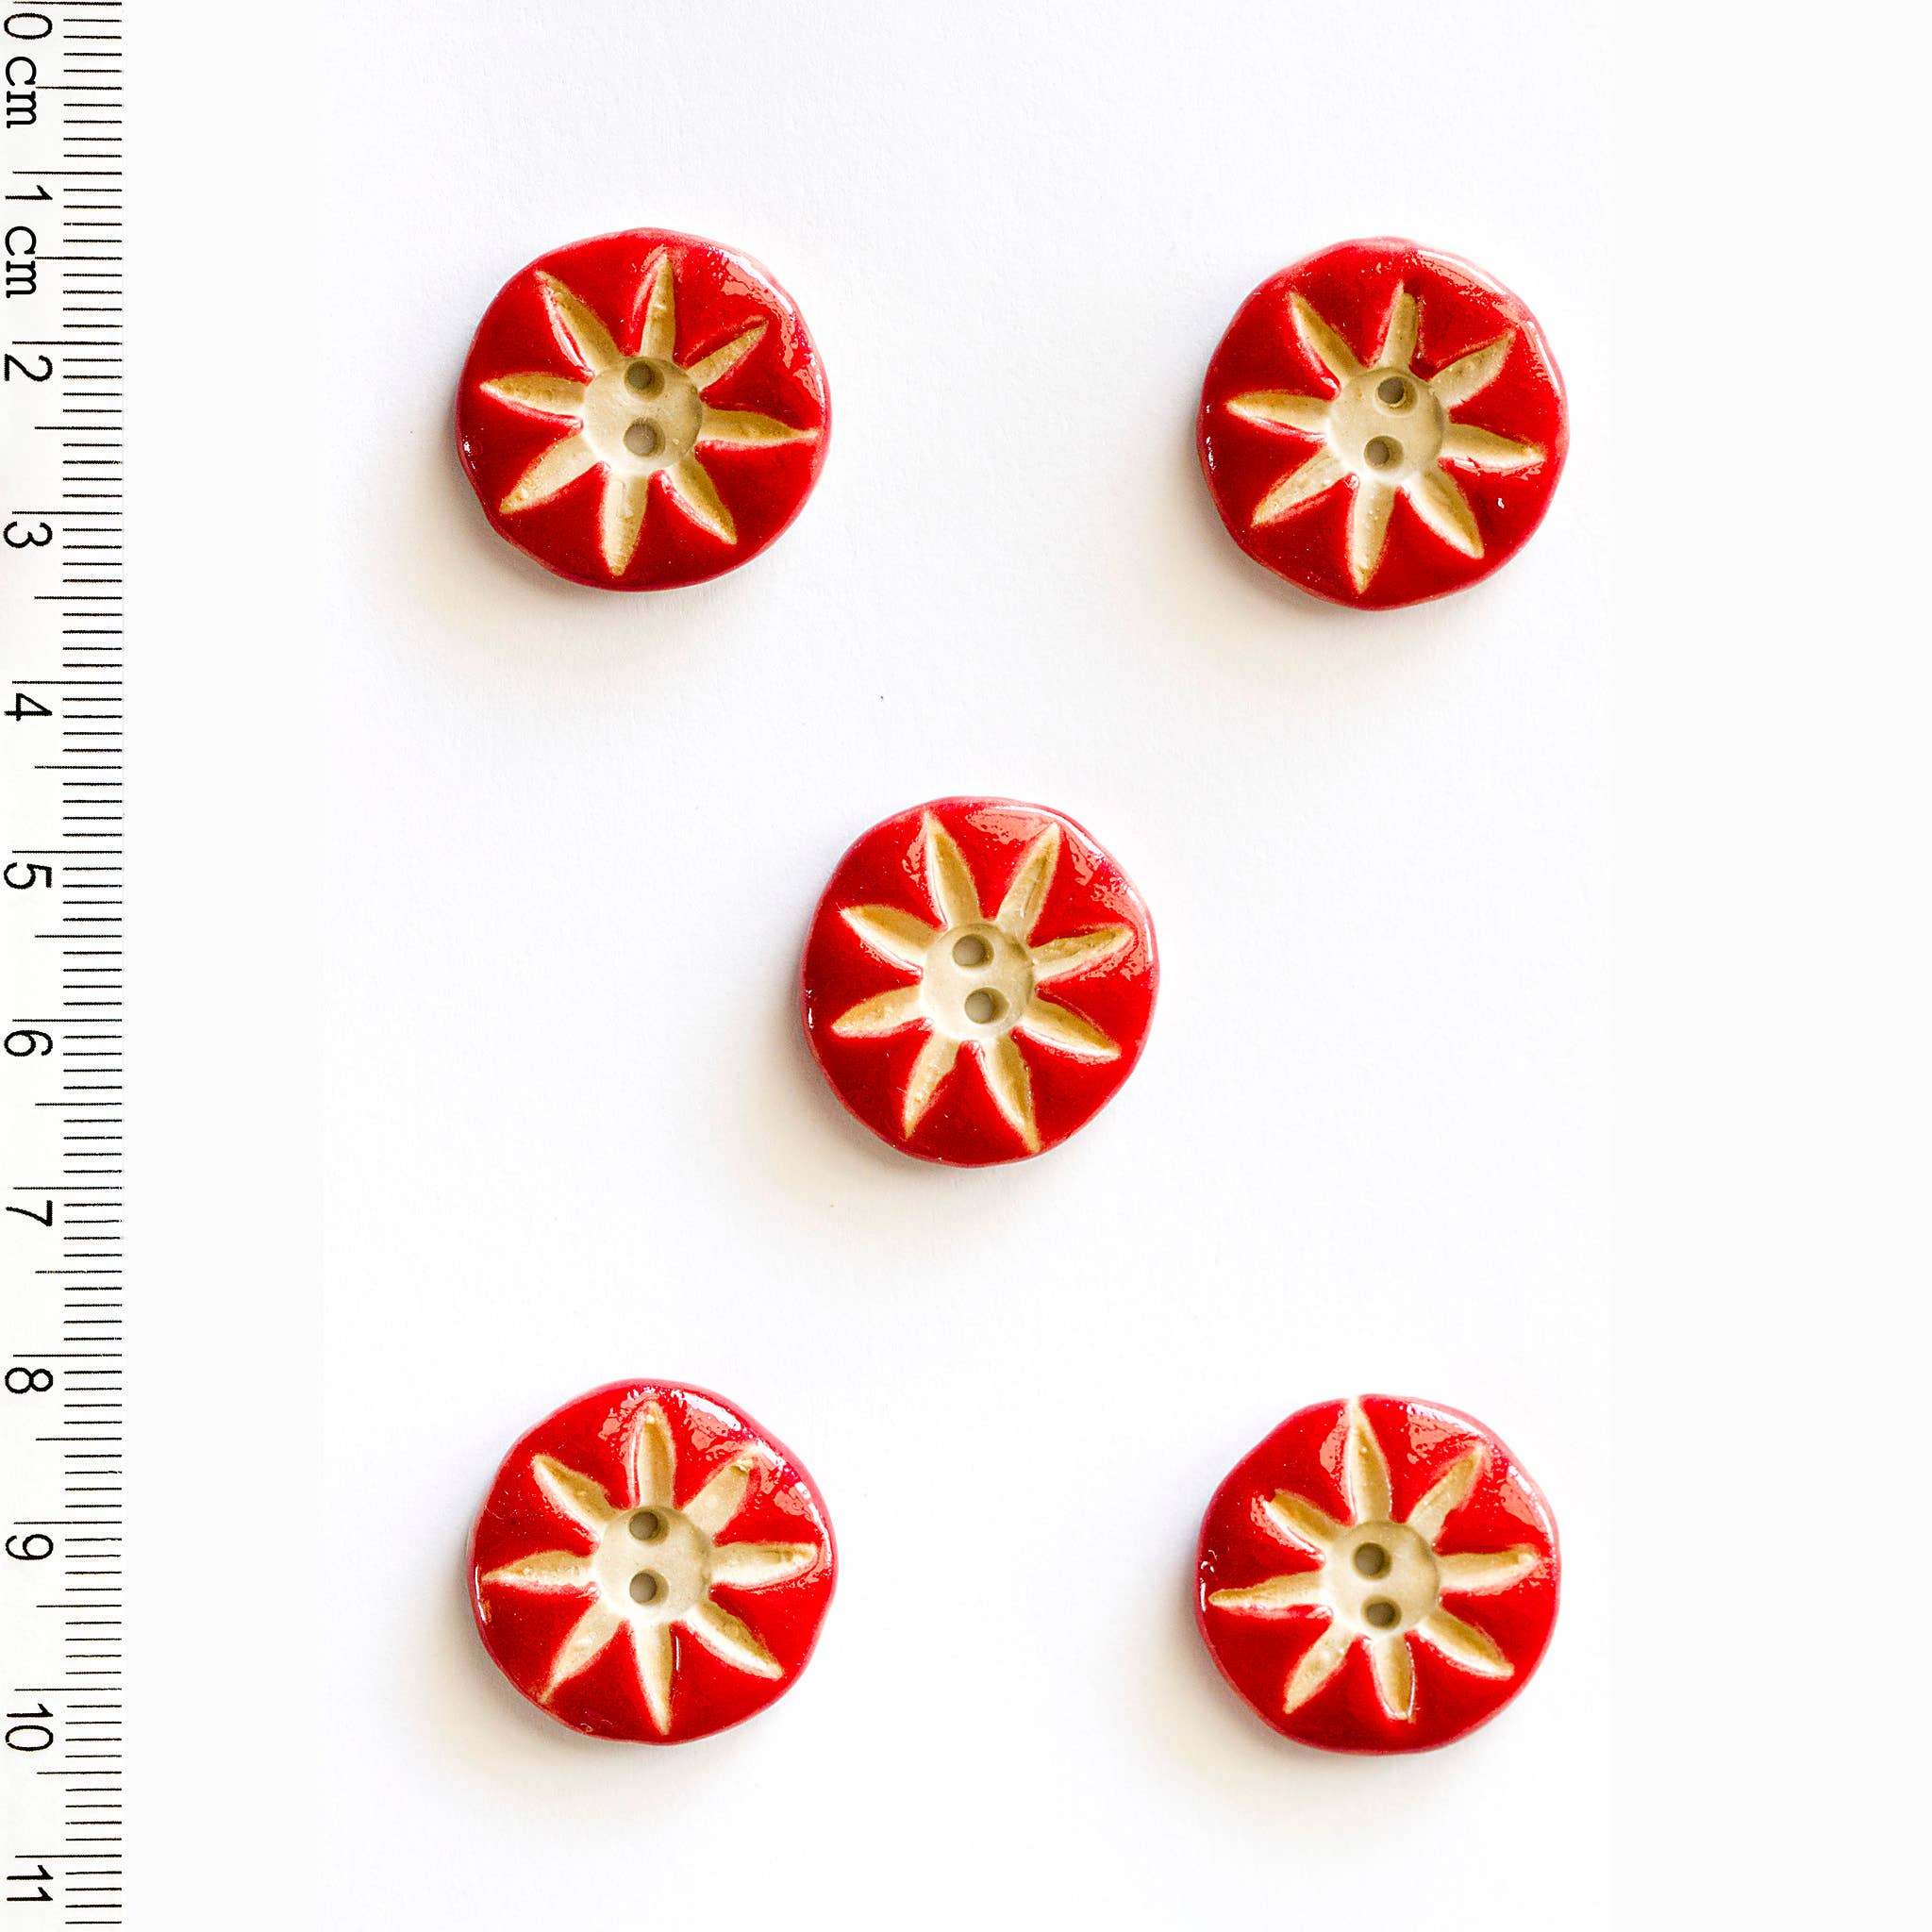 Incomparable Buttons - 5 Red Star Patterned Buttons